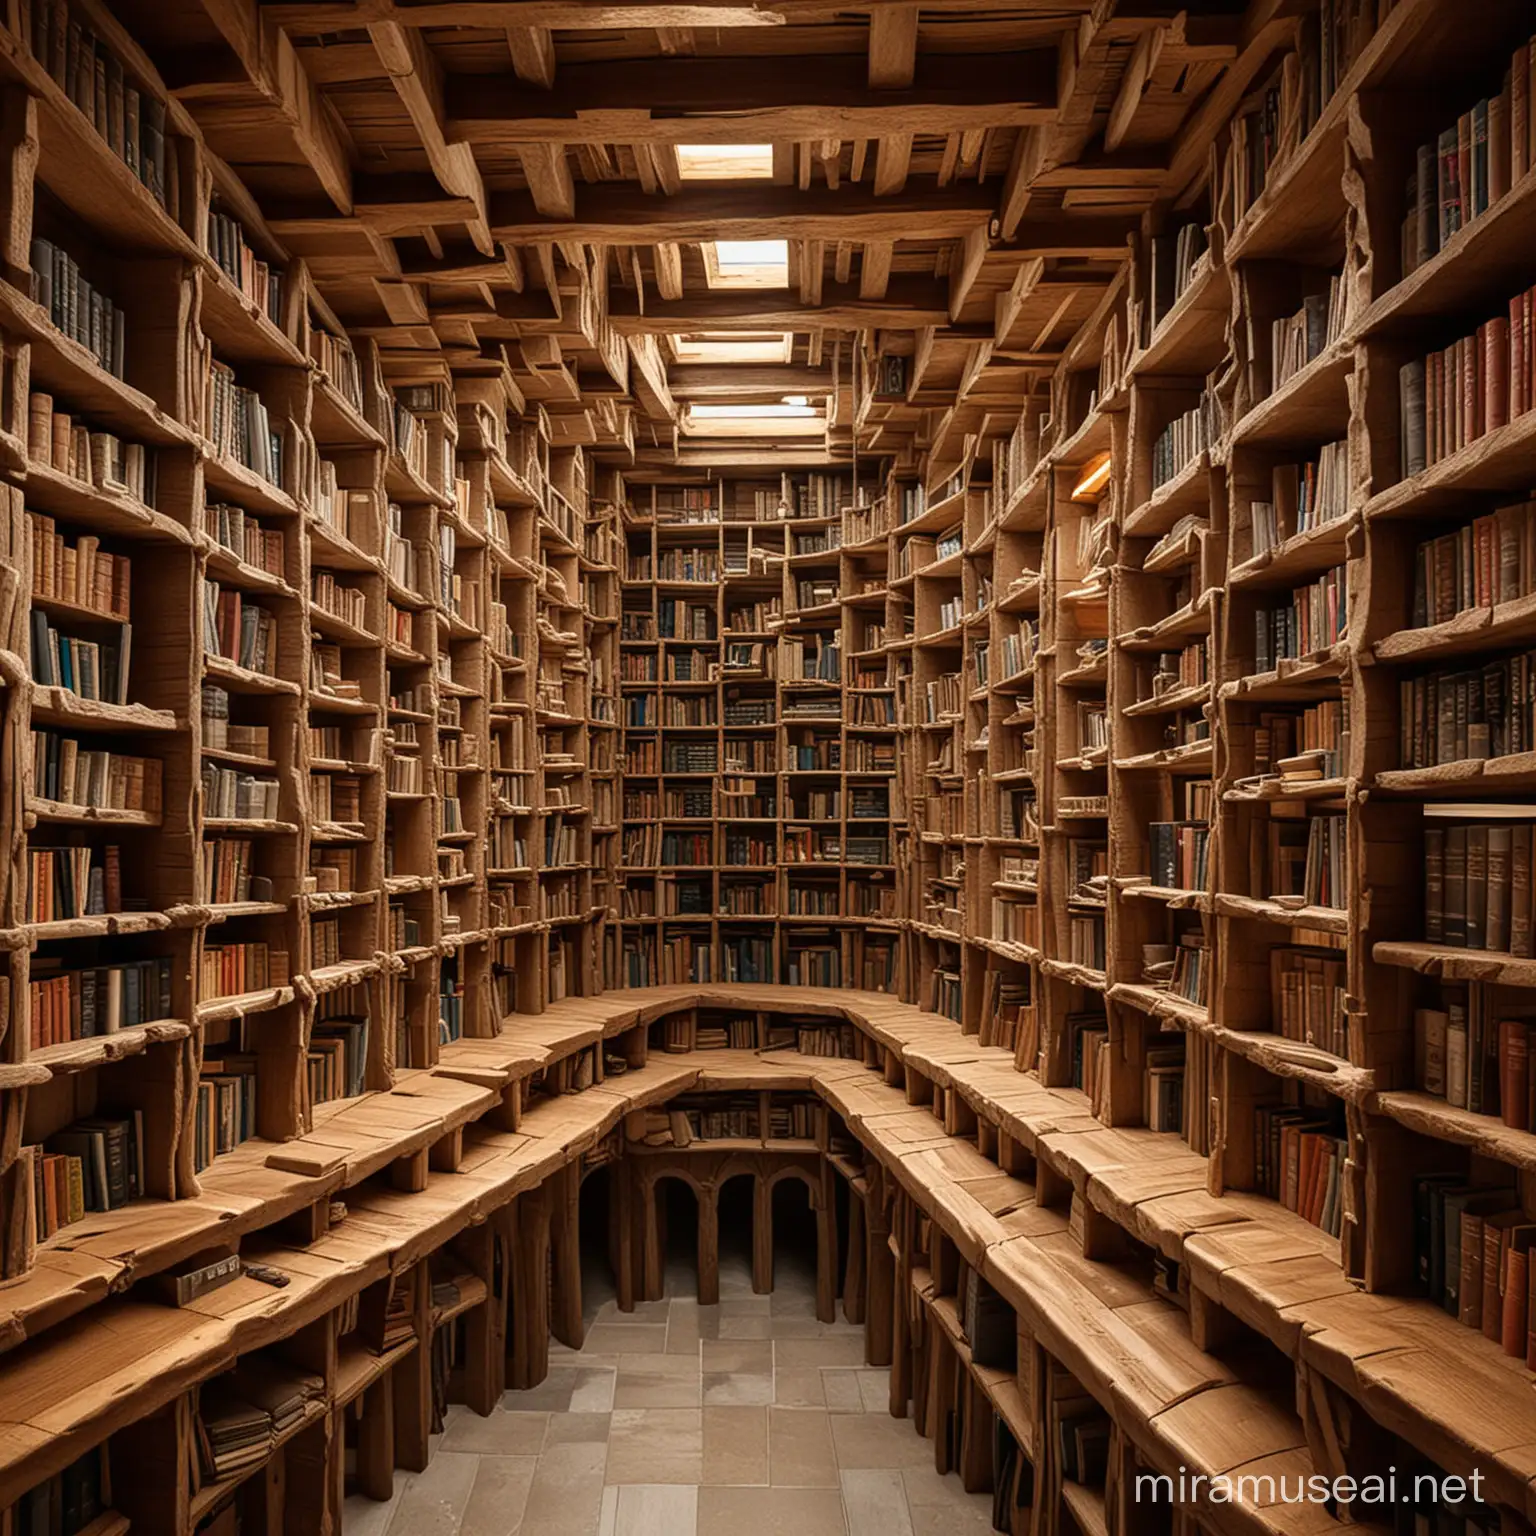 The Library of Babel in a wooden Labyrinth underground